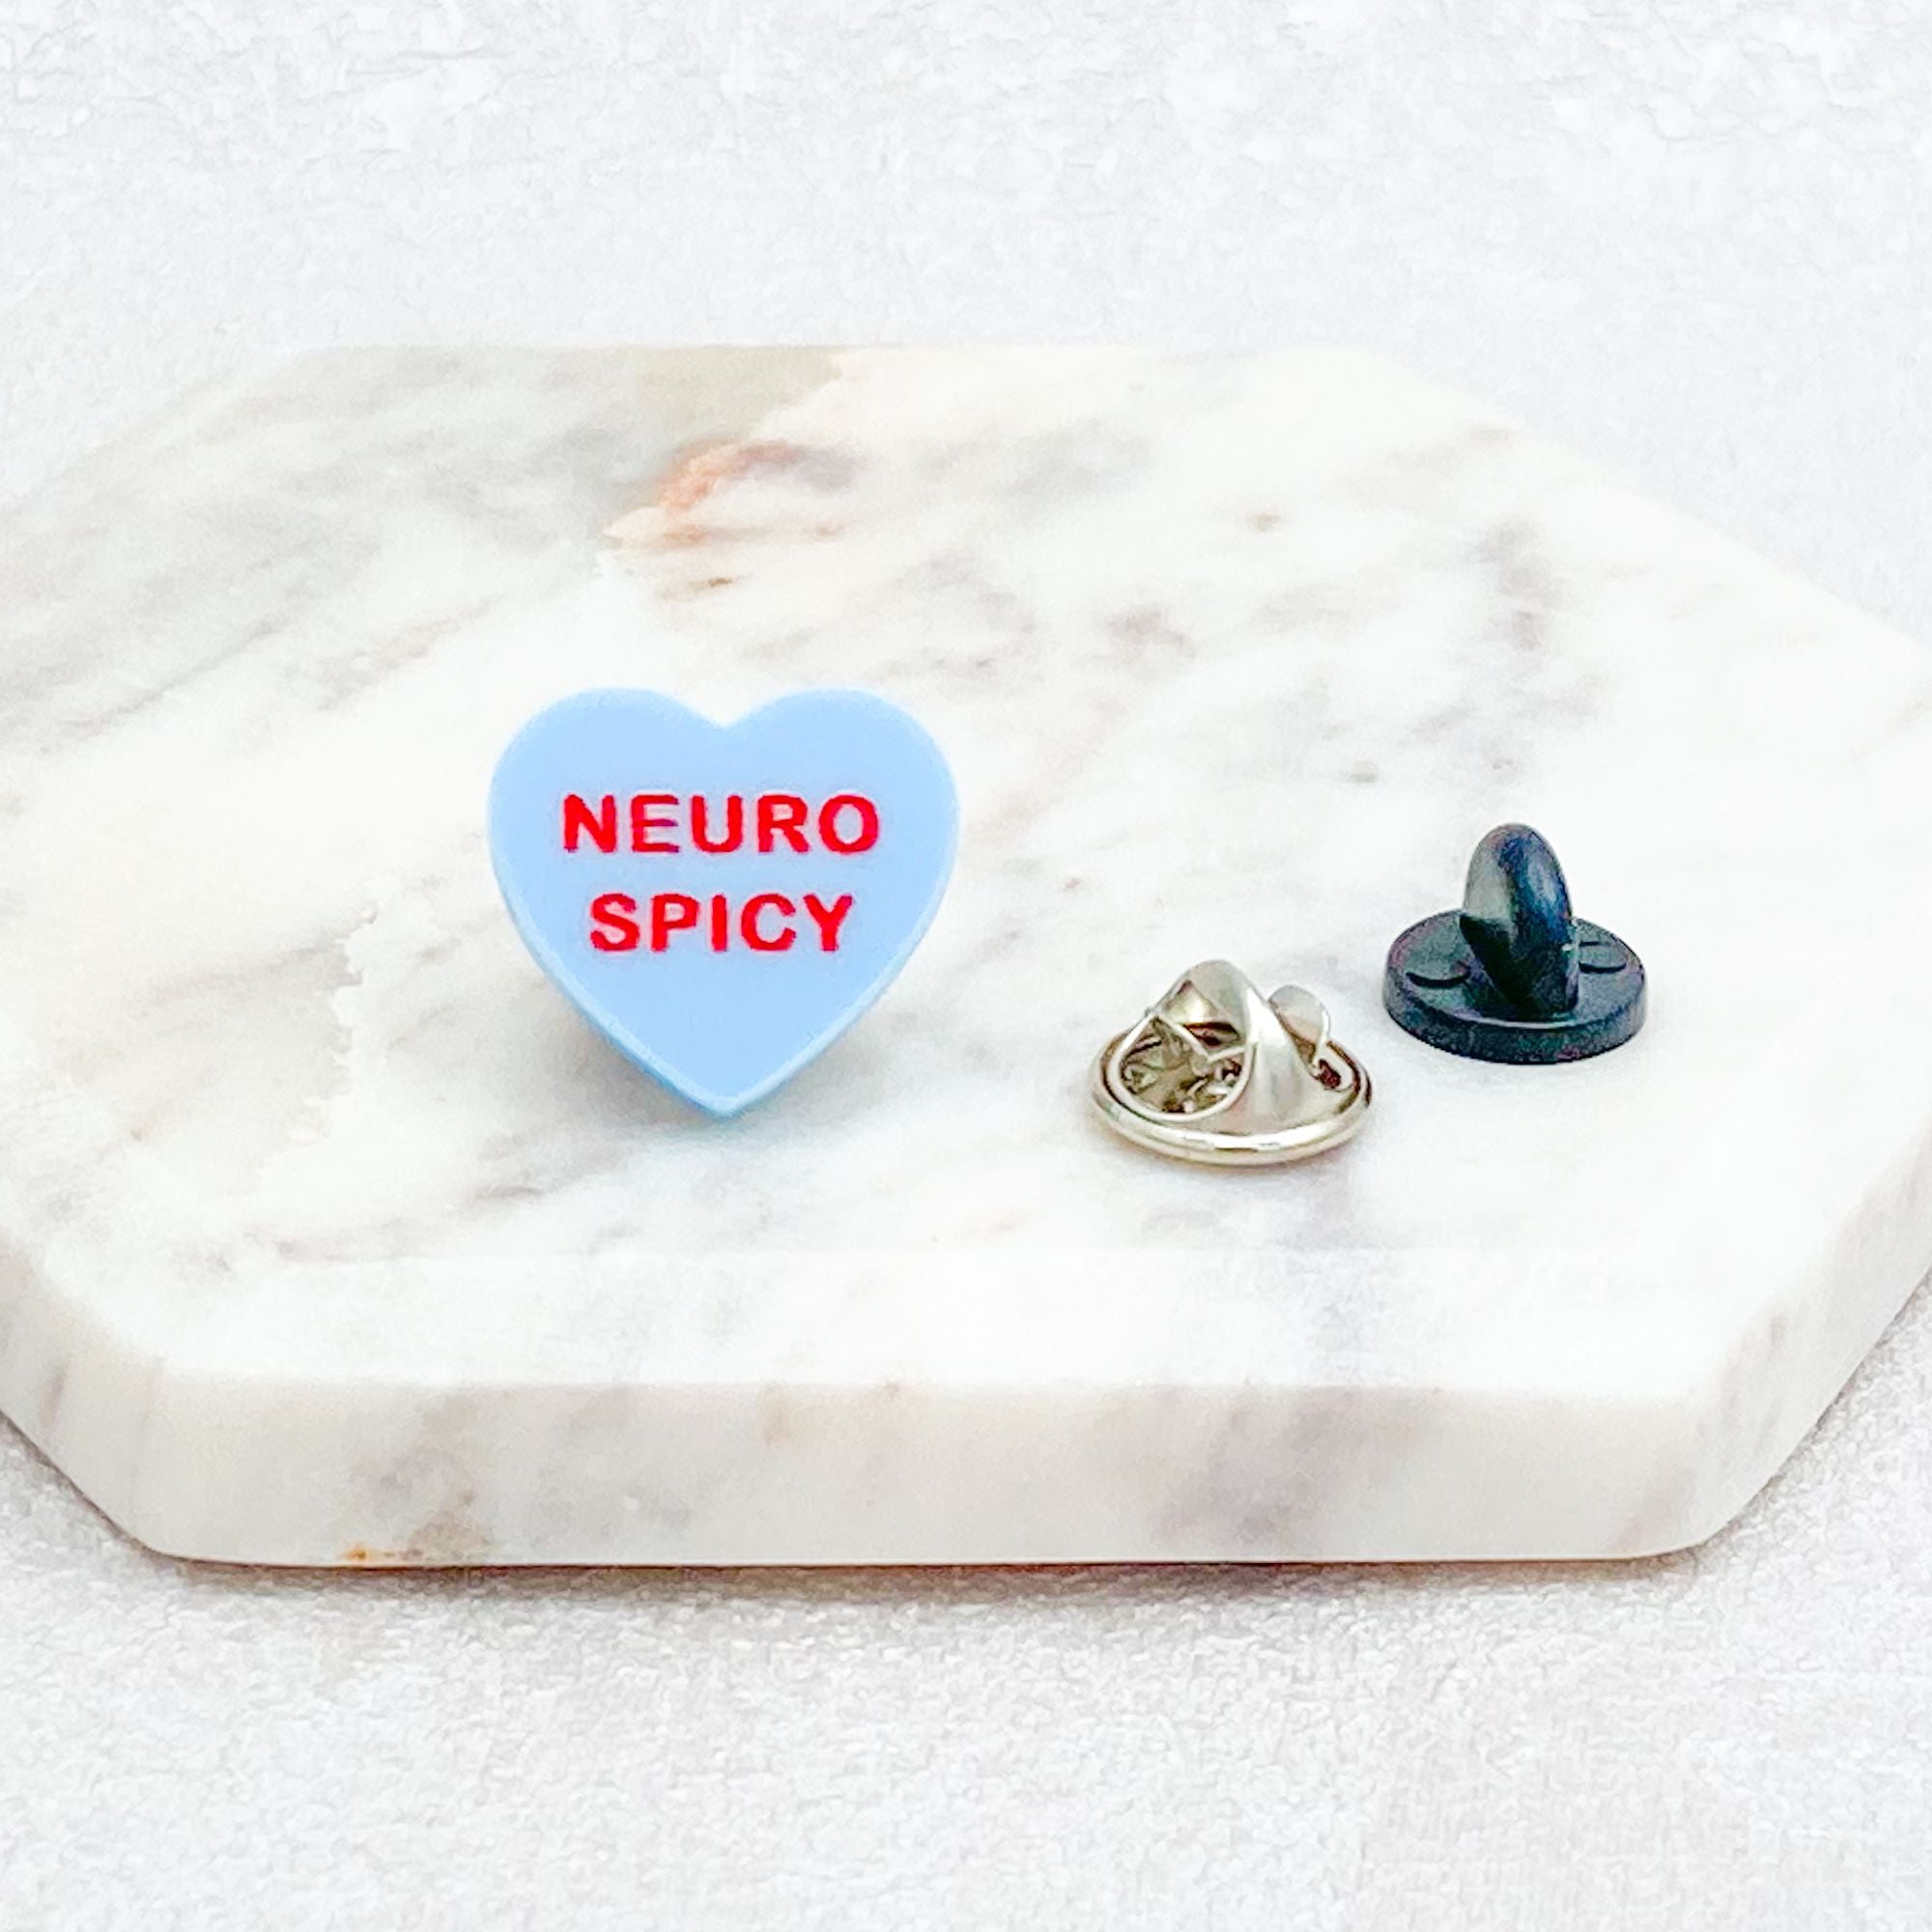 neuro spicy heart pin for autism adhd